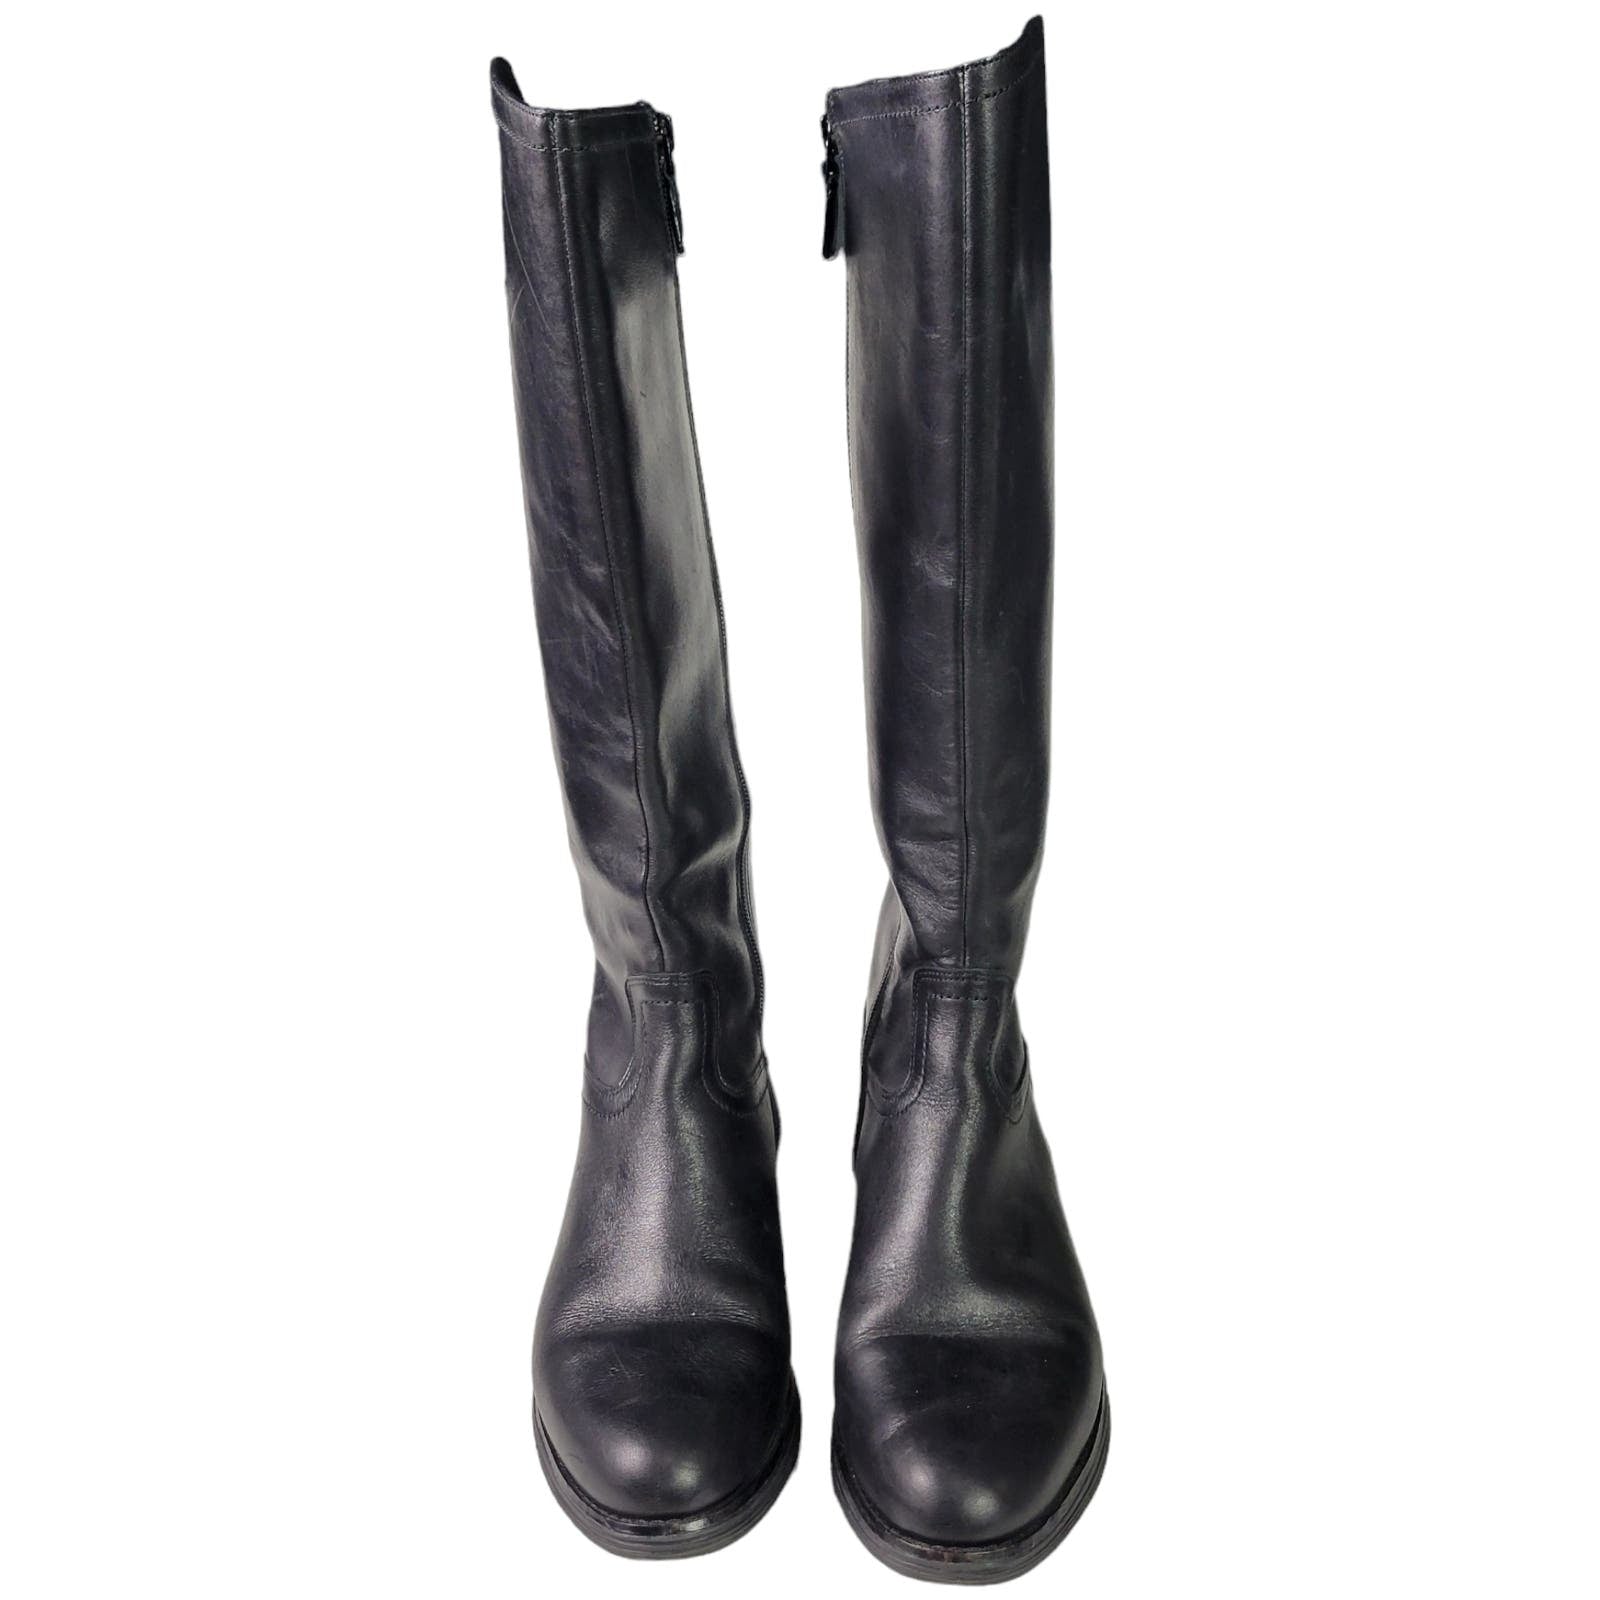 Cole Haan Myriam Tall Boots Black Leather Flat Winter OriginalGrand Grand Size 7.5